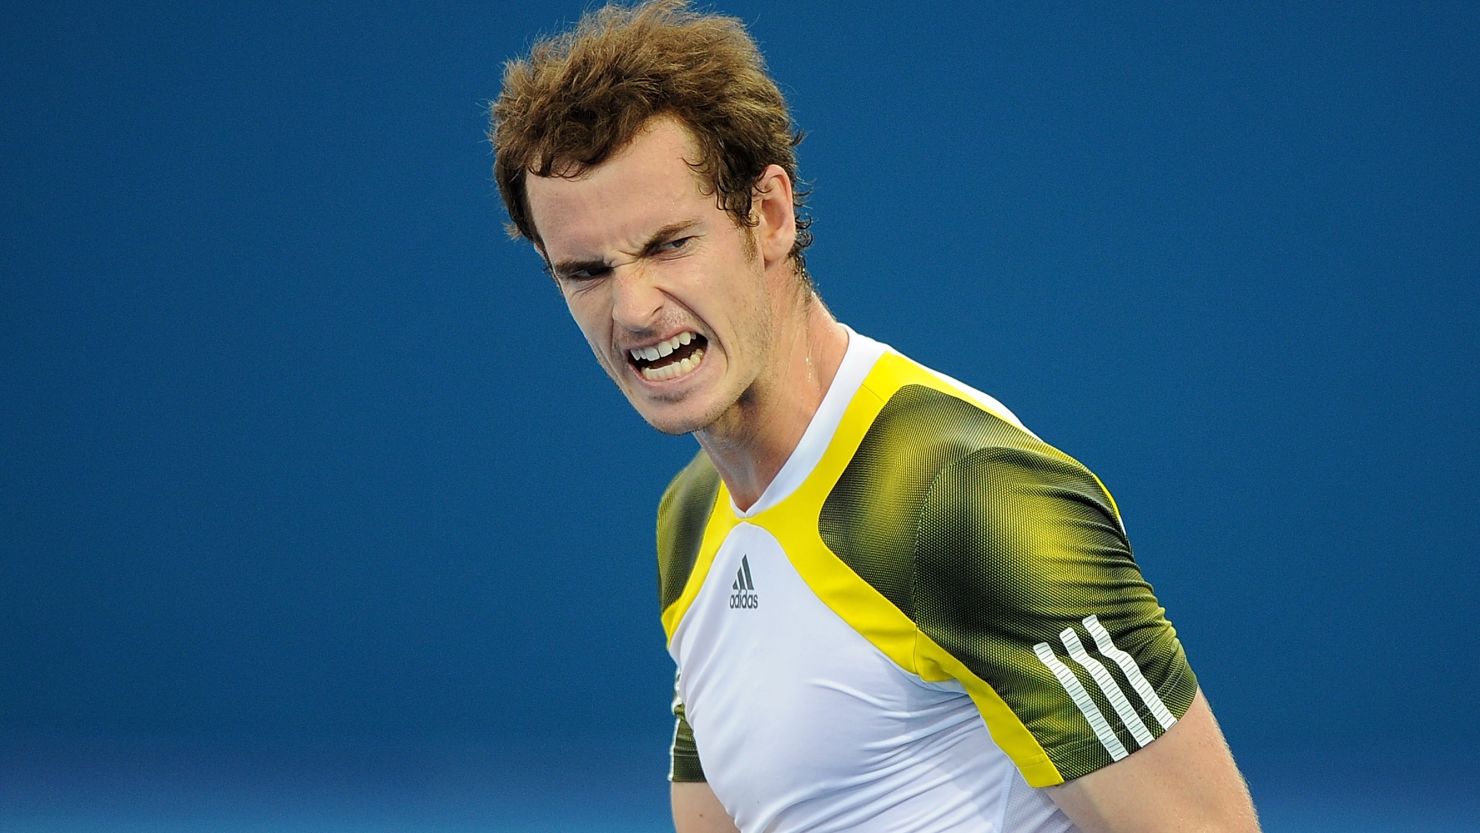 Andy Murray warmed up for the Australian Open by winning the Brisbane International.